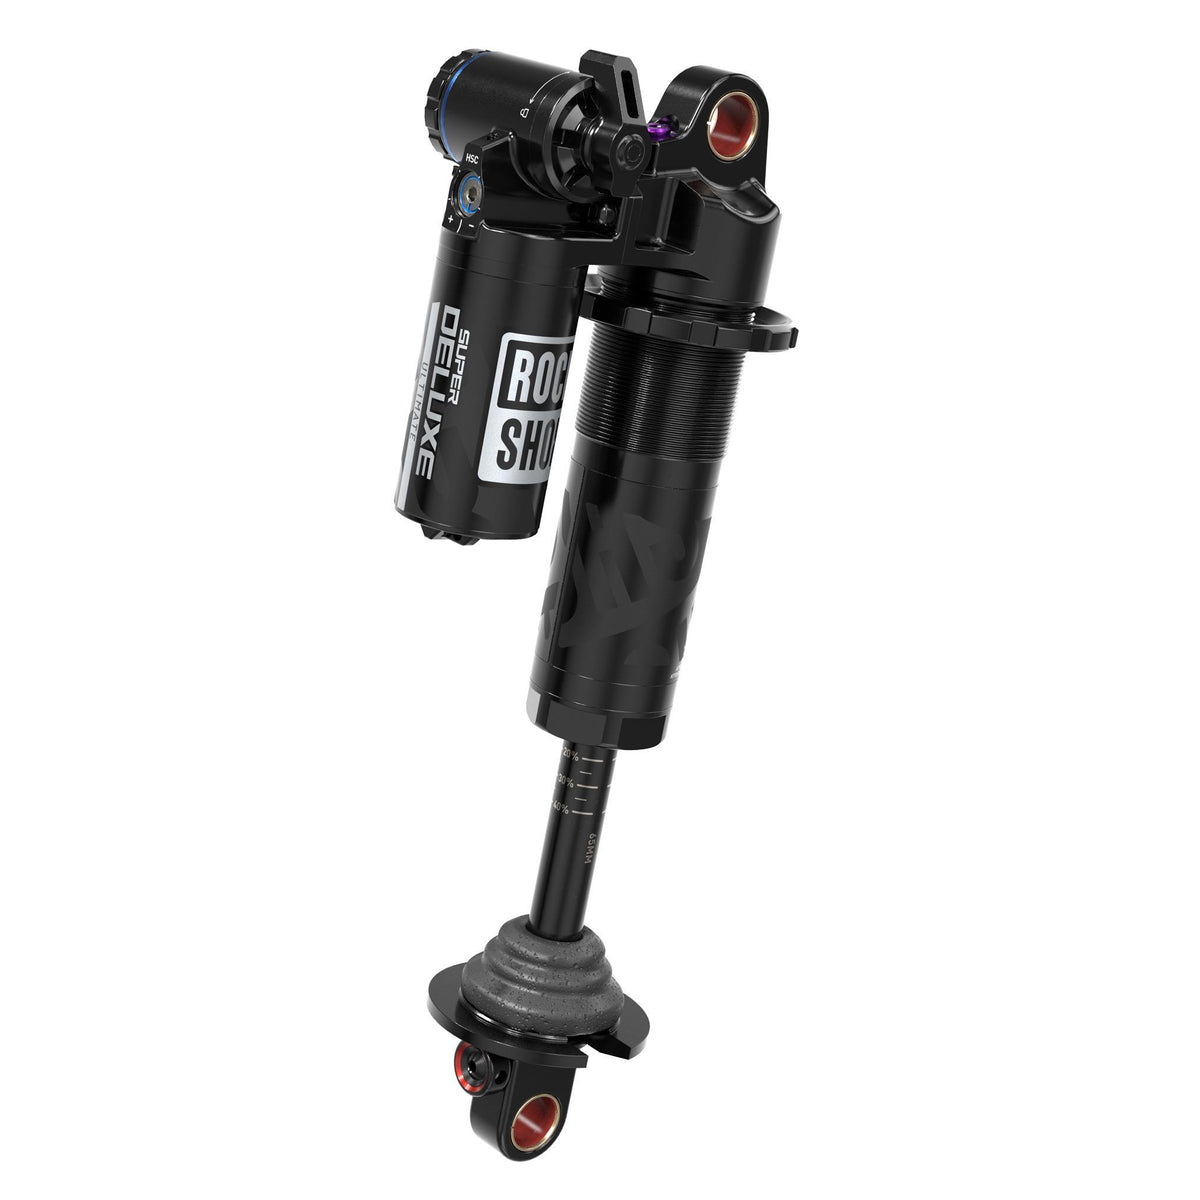 Rockshox Super Deluxe Coil Ultimate Rear Shock RC2T - Linearreb/Mcomp, 320LB Lockout, Hydraulic Bottom Out, Standard Bearing (Spring Sold Separate) B1 Transitionpatrol 2017 Black 230X65